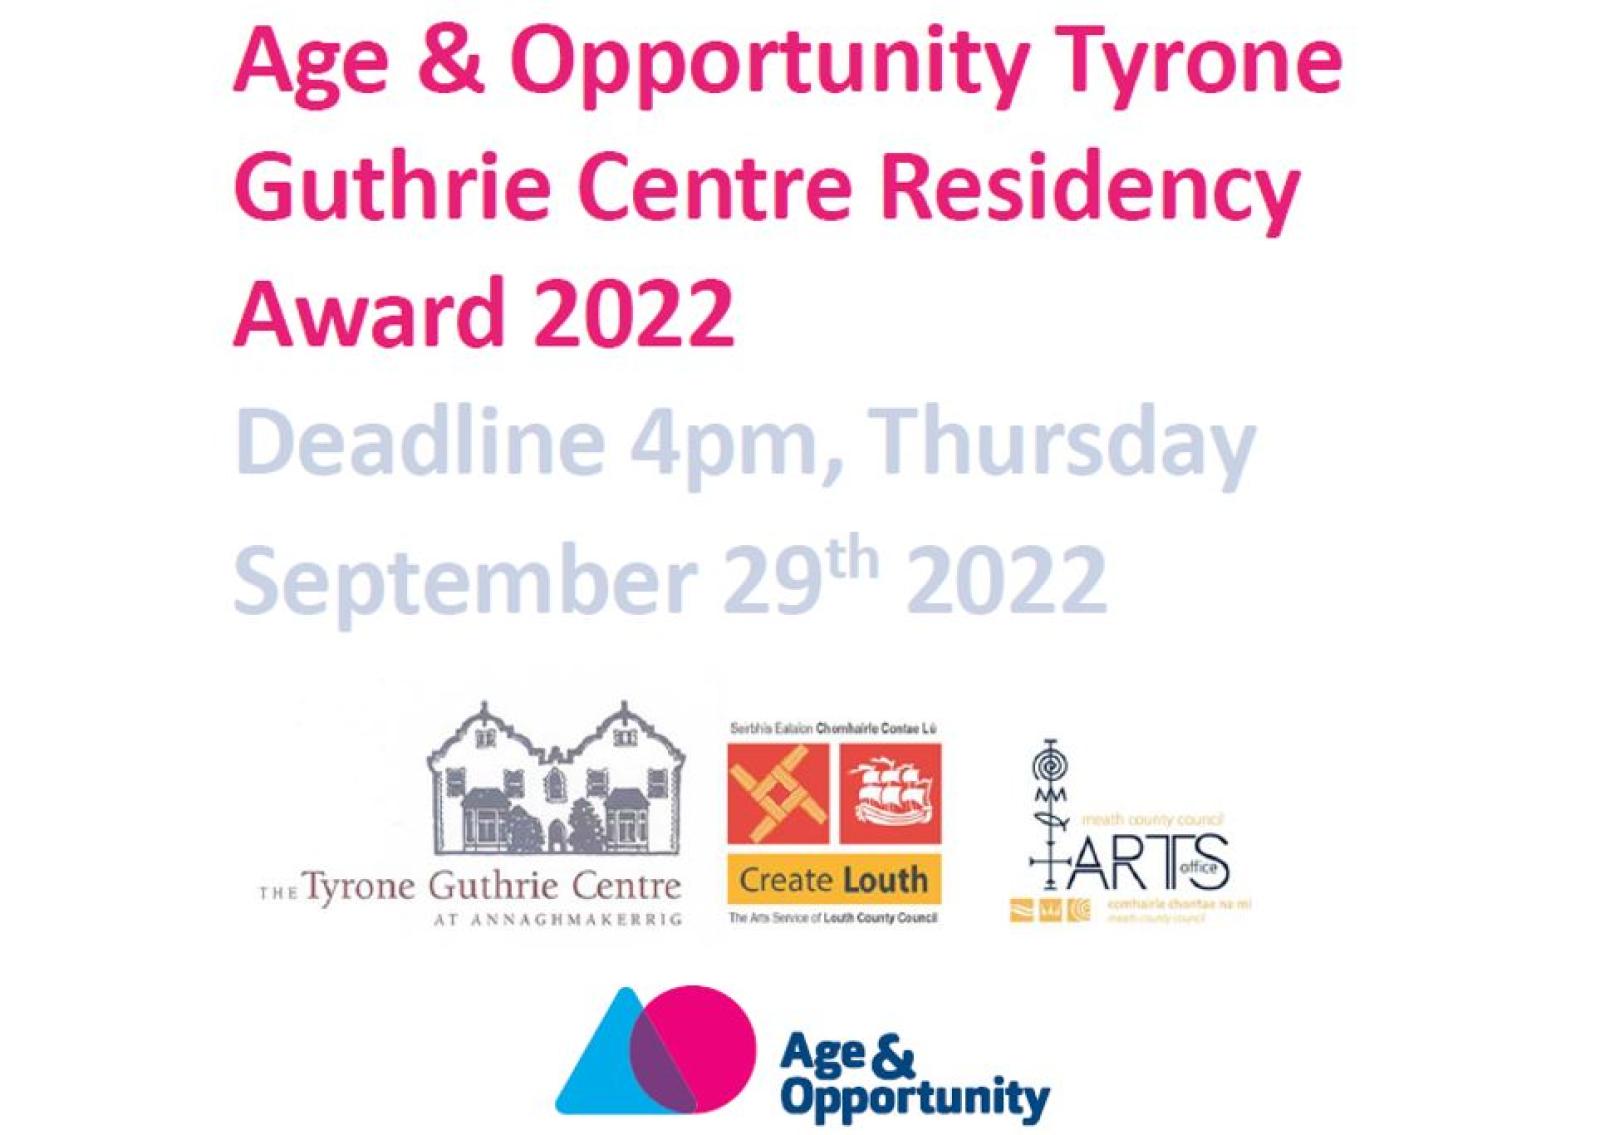 Age & Opportunity Tyrone Guthrie Centre Residency Award 2022